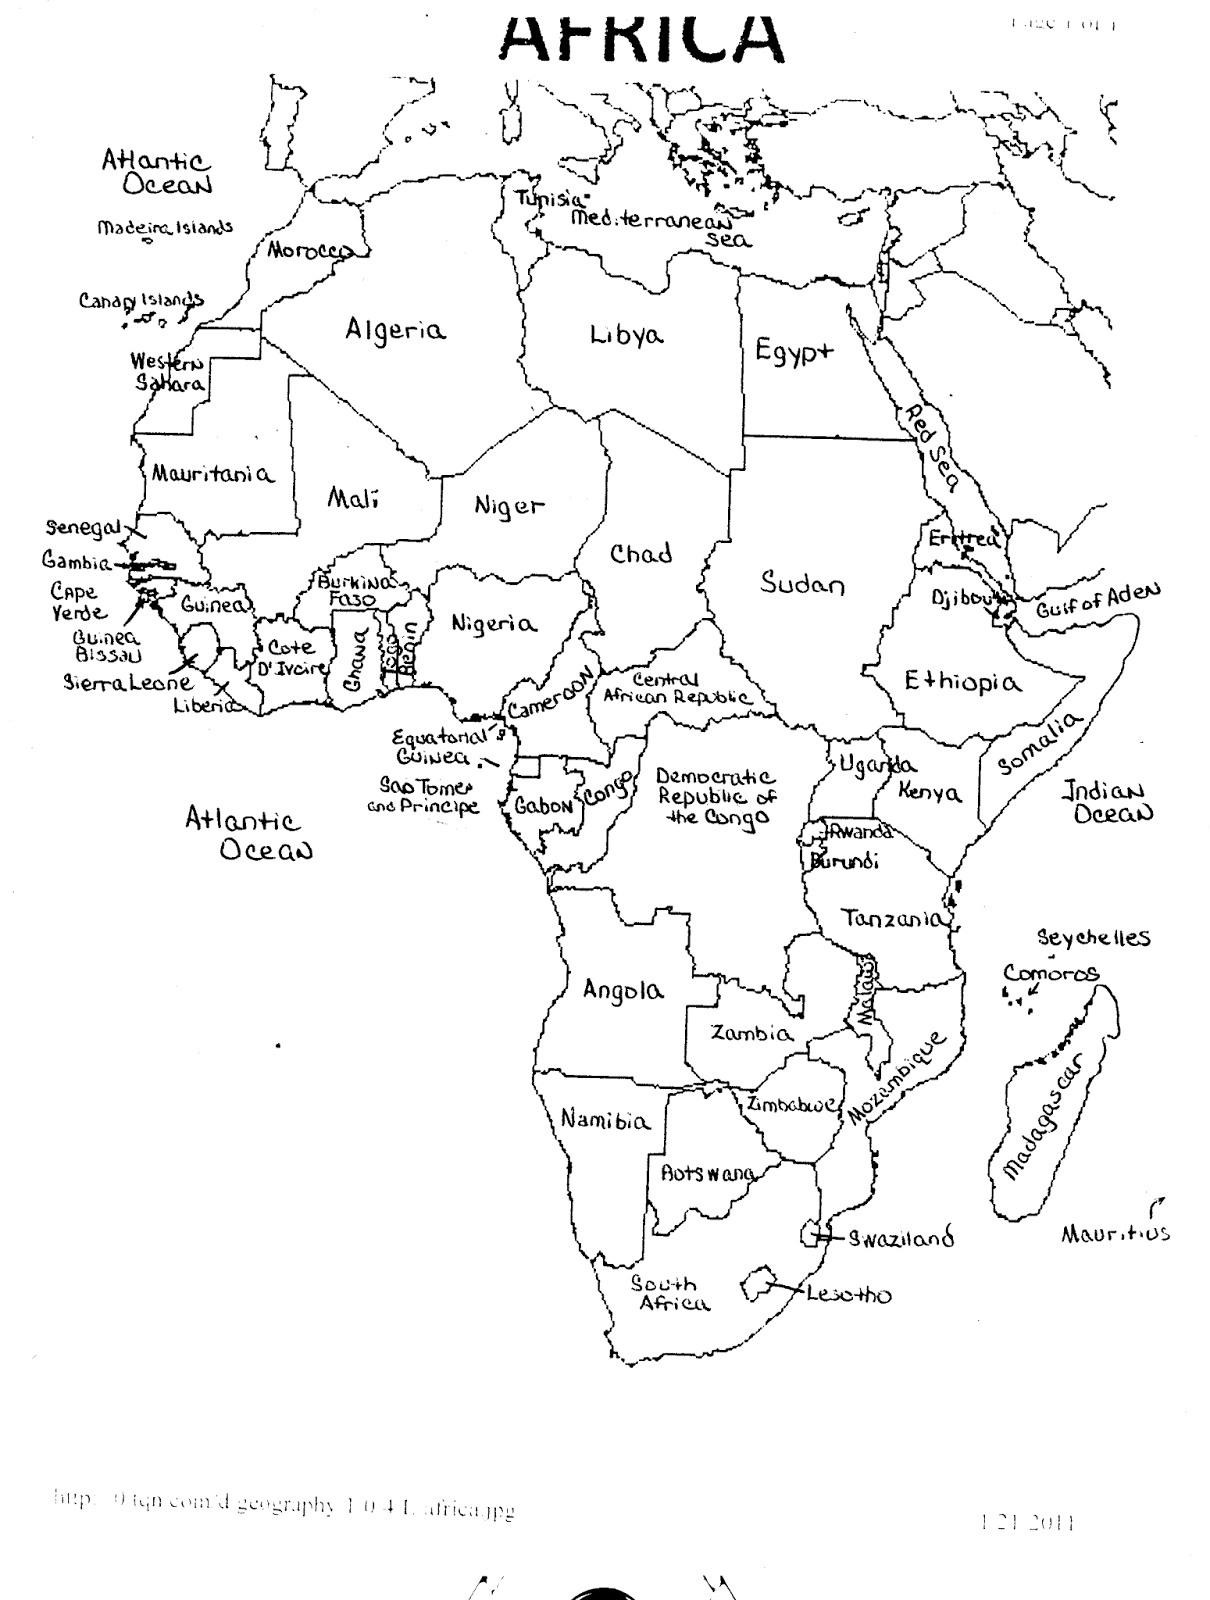 unlabeled-map-of-africa-topographic-map-of-usa-with-states